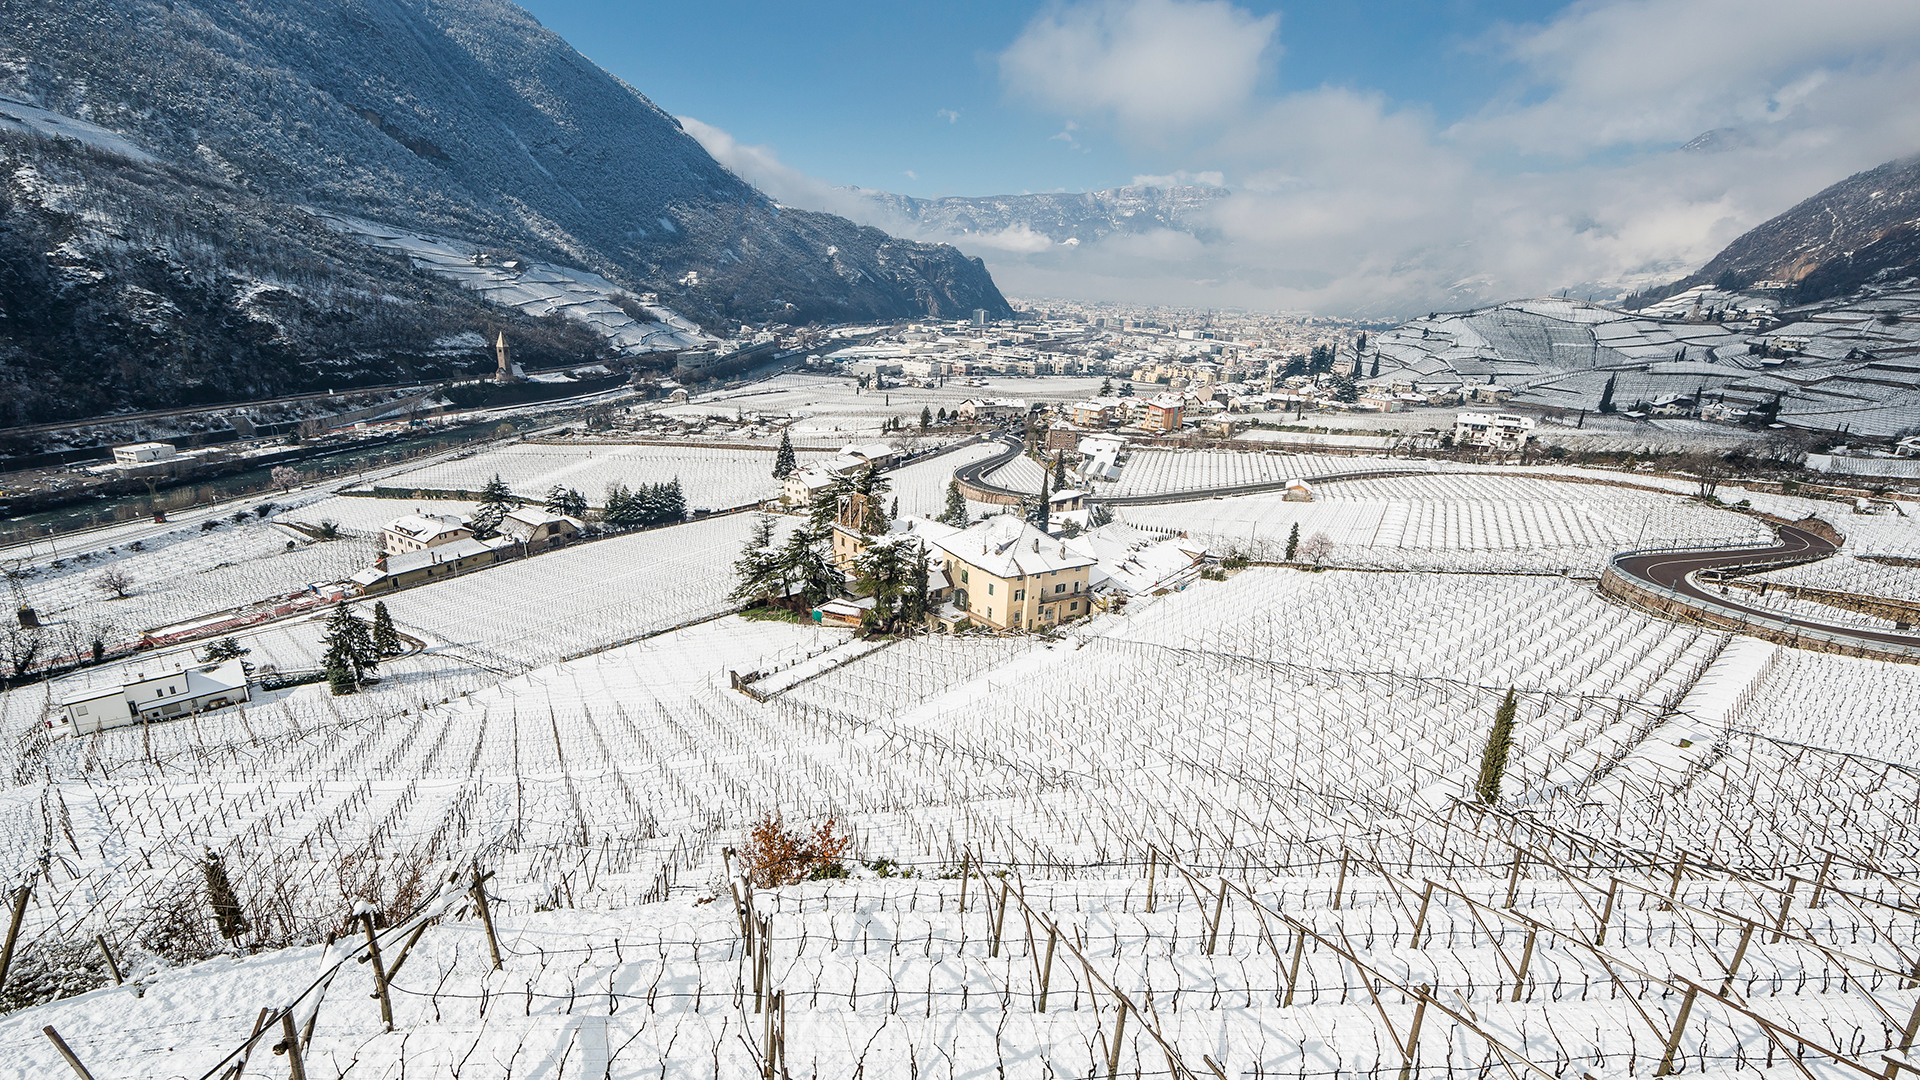 Winter landscape on a sunny afternoon in Bolzano where the vineyards and villages are covered in snow.